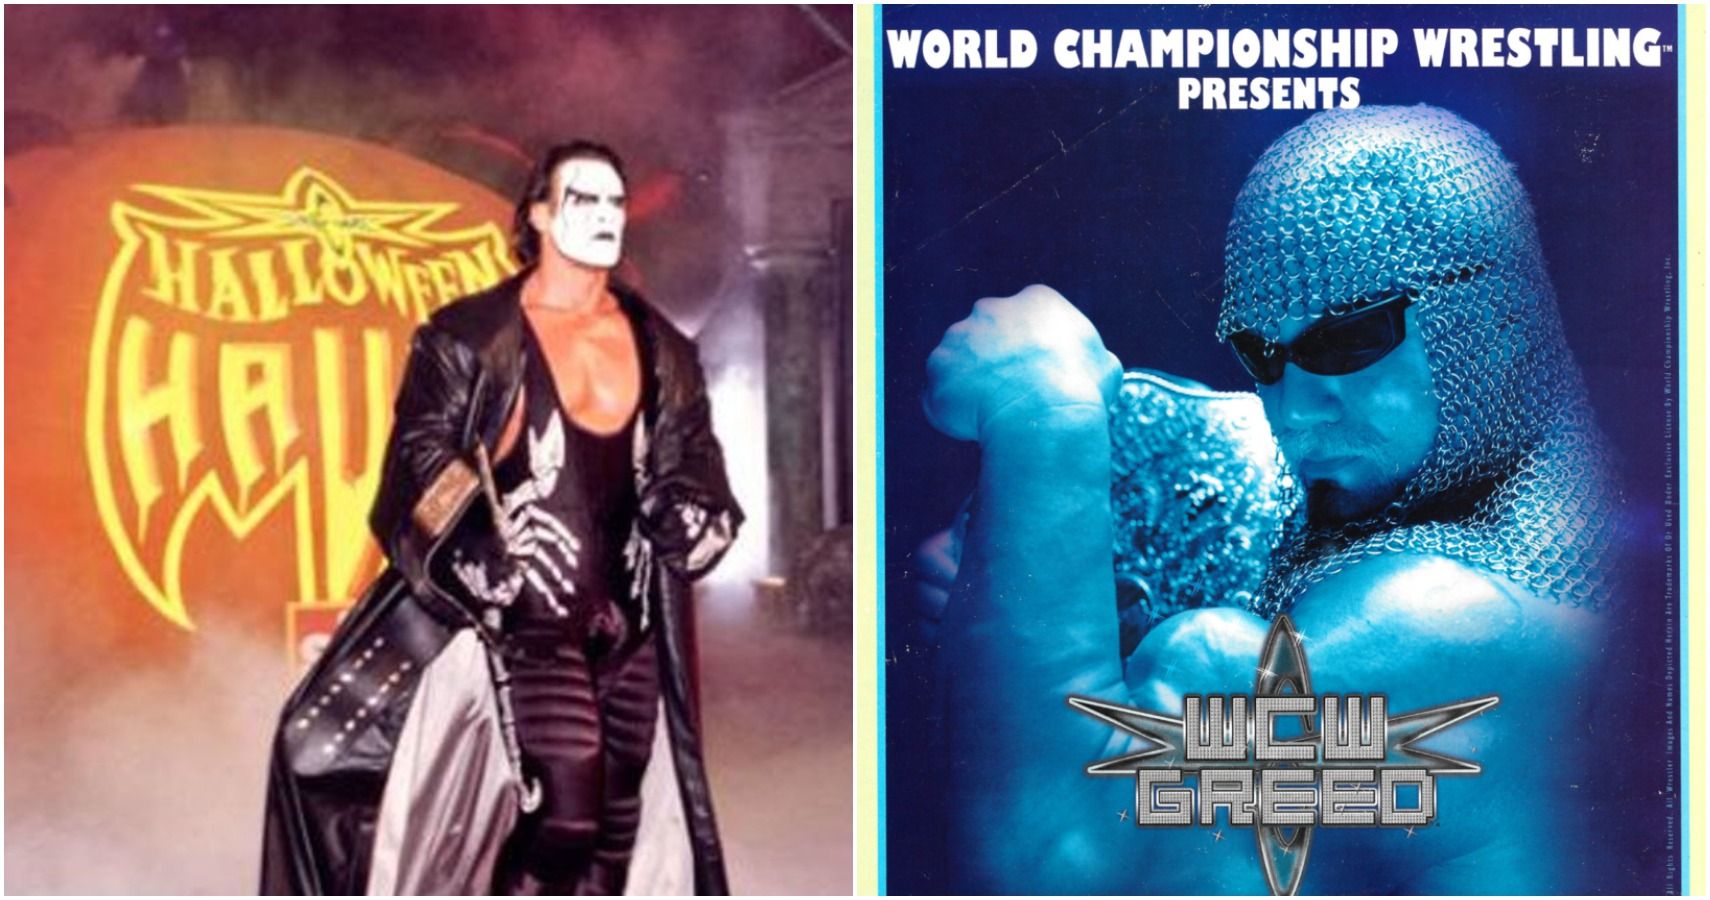 pro wrestling ppv posters wcw greed